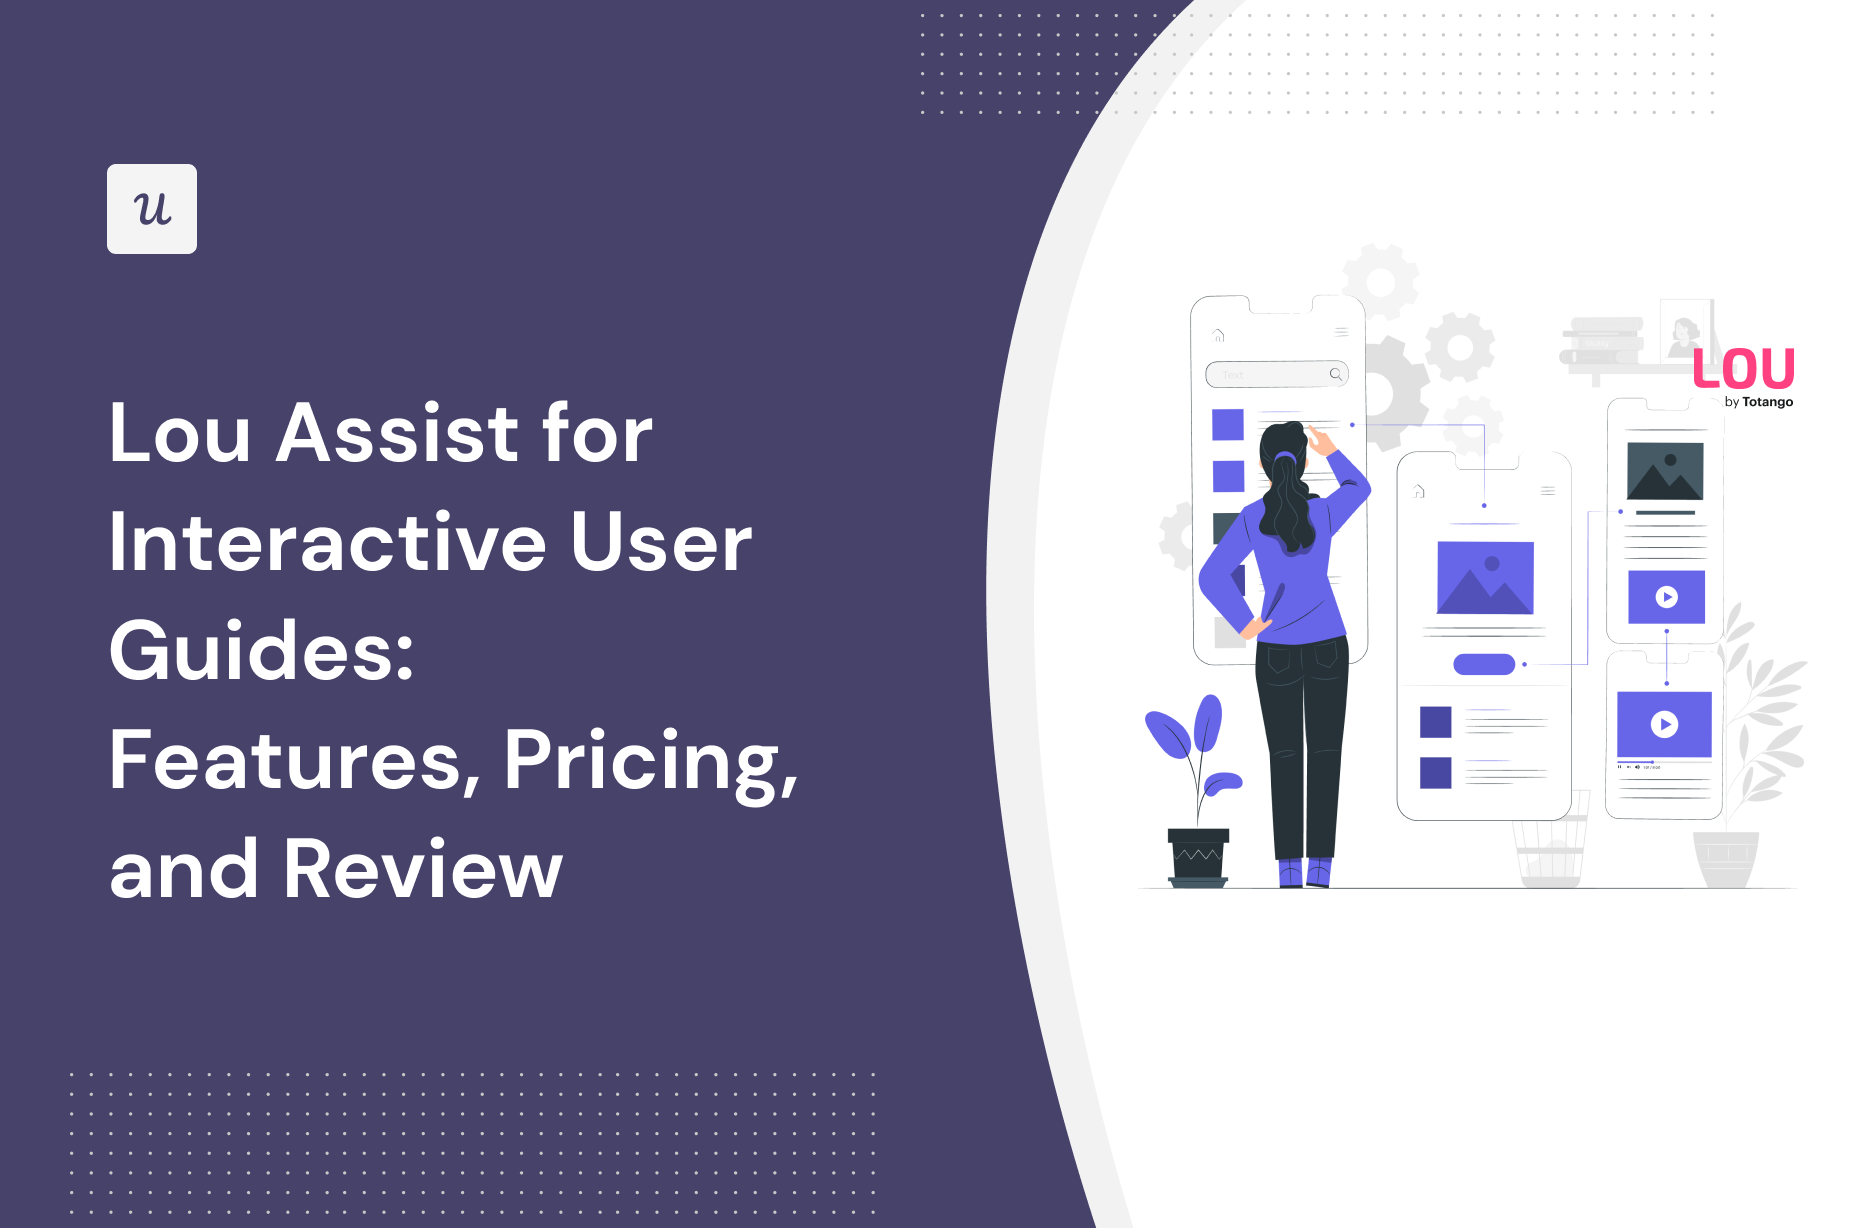 Lou Assist for Interactive User Guides: Features, Pricing, and Review